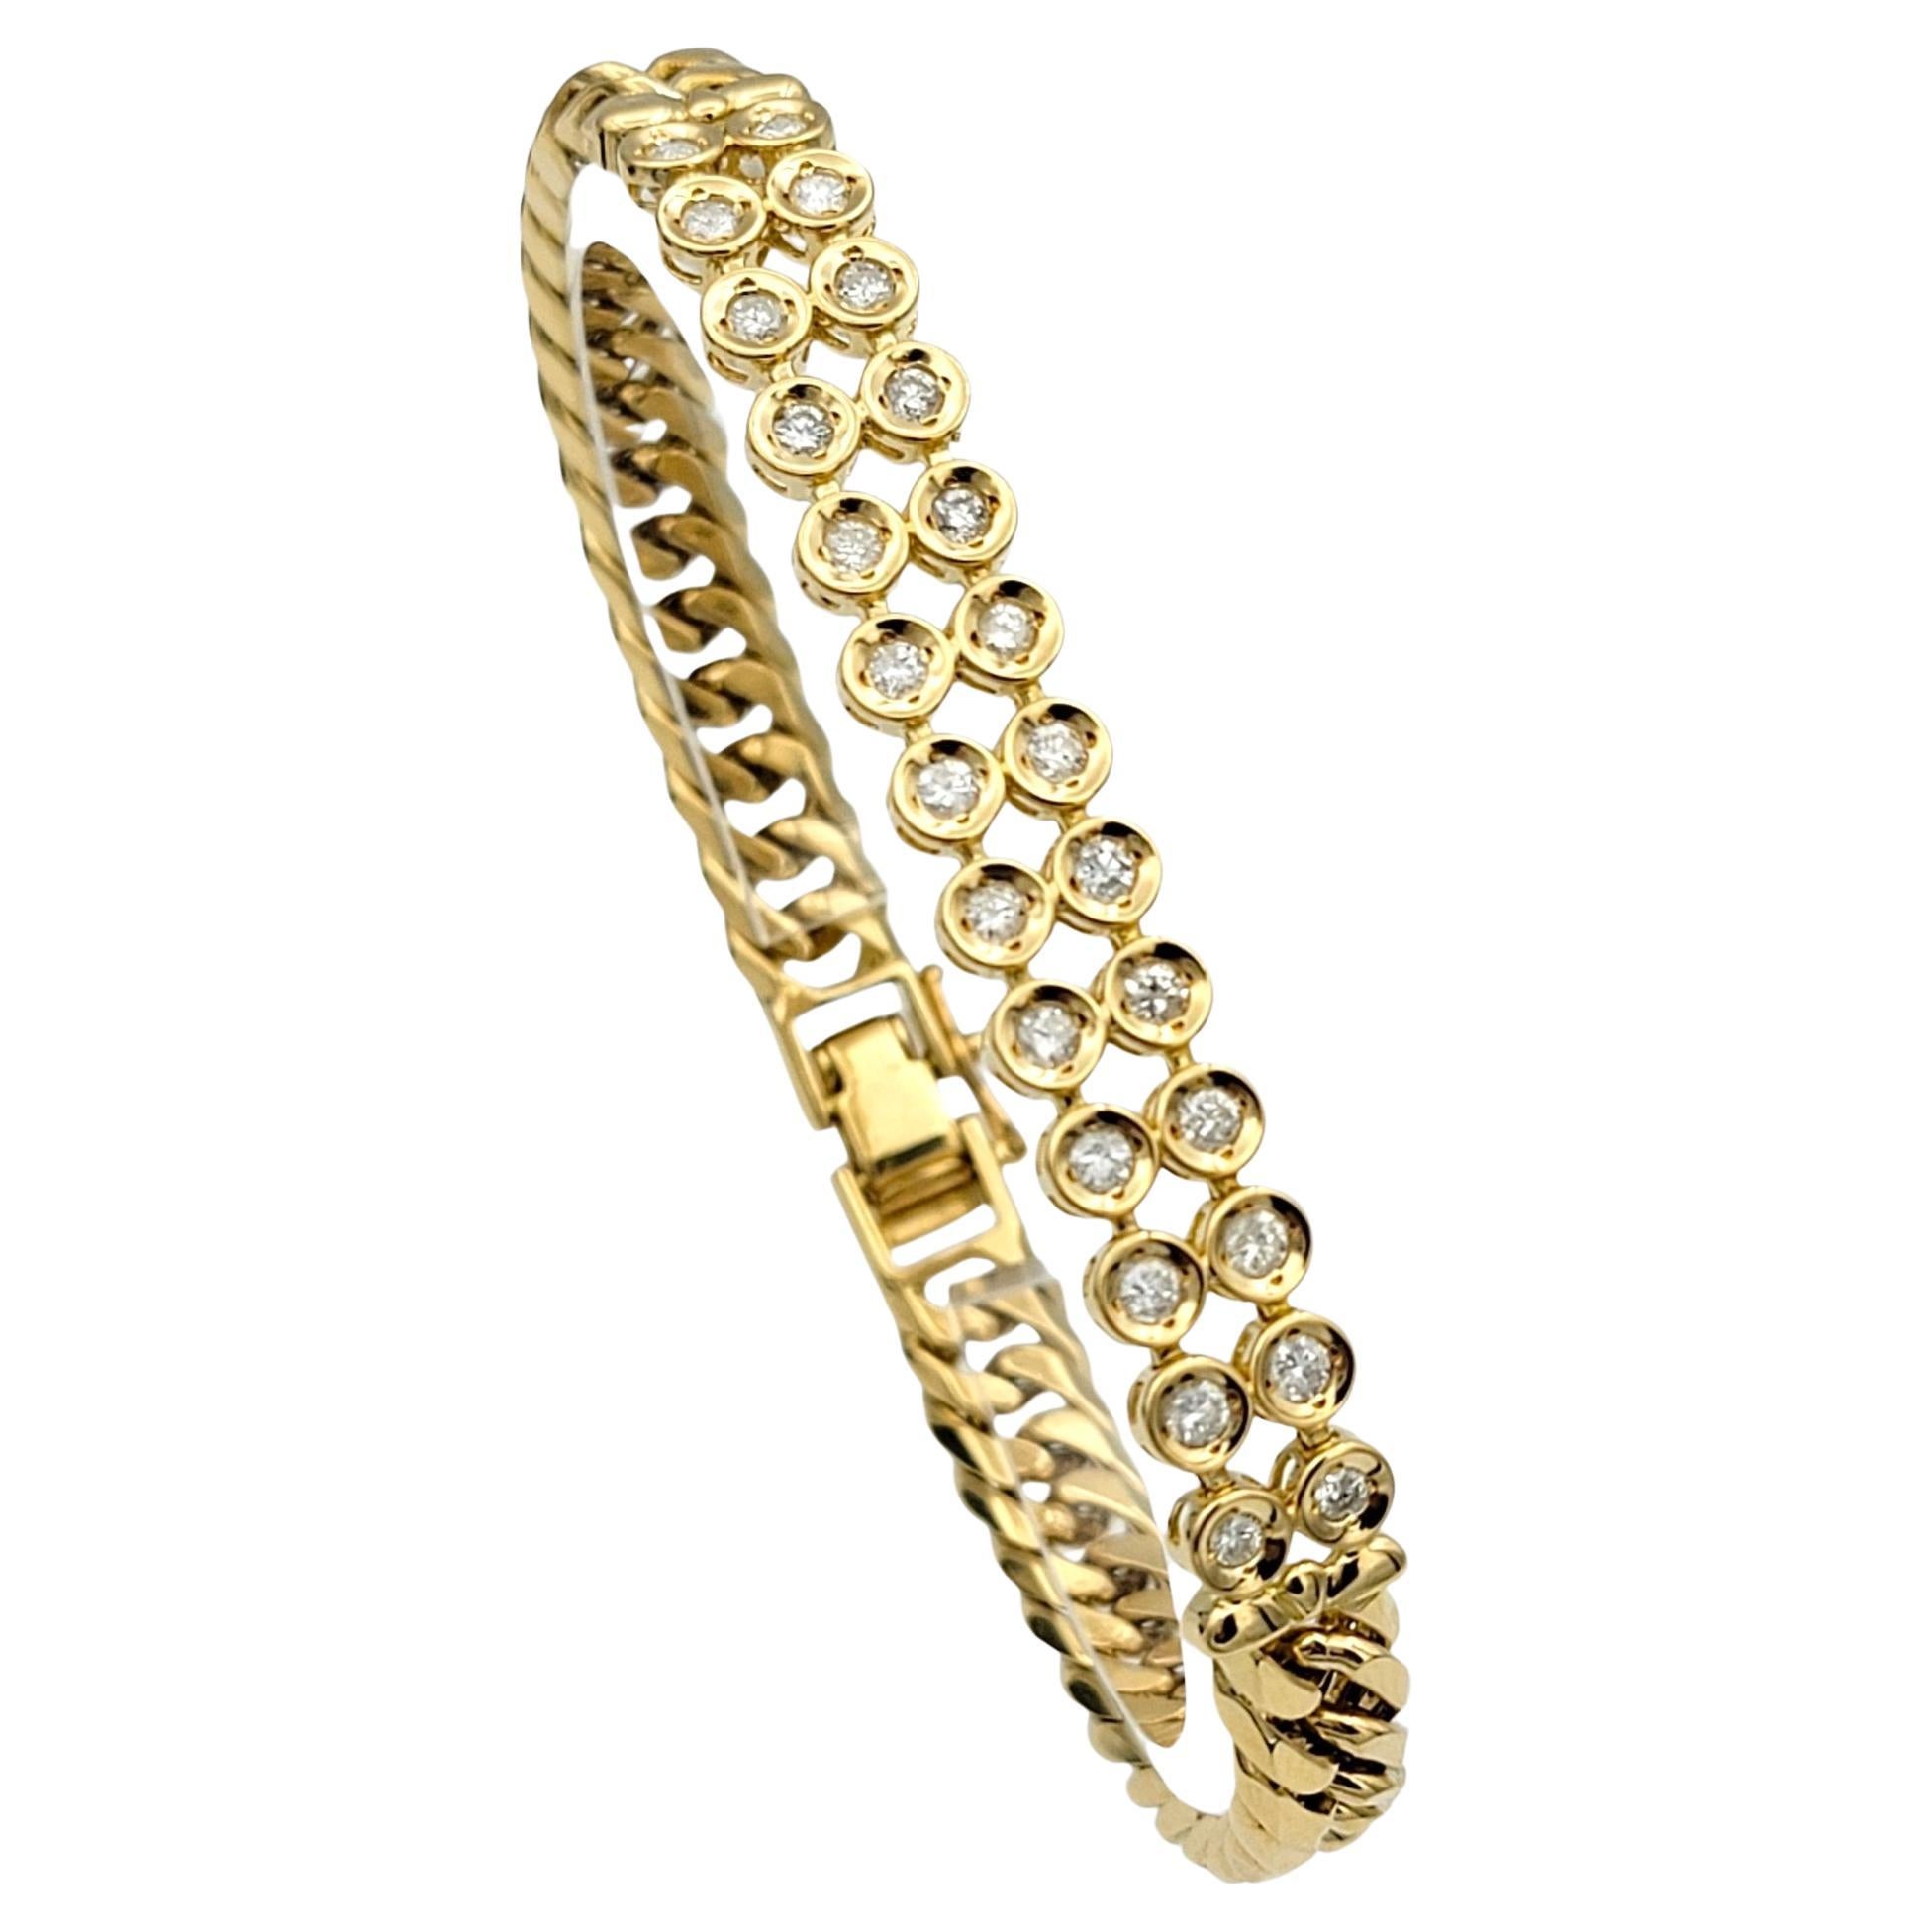 The inner circumference of this bracelet measures 6.88 inches and will comfortably fit up to a 6.75 inch wrist. 

This exquisite bracelet combines the classic elegance of a curb link chain with the dazzling beauty of bezel-set diamonds. Crafted from